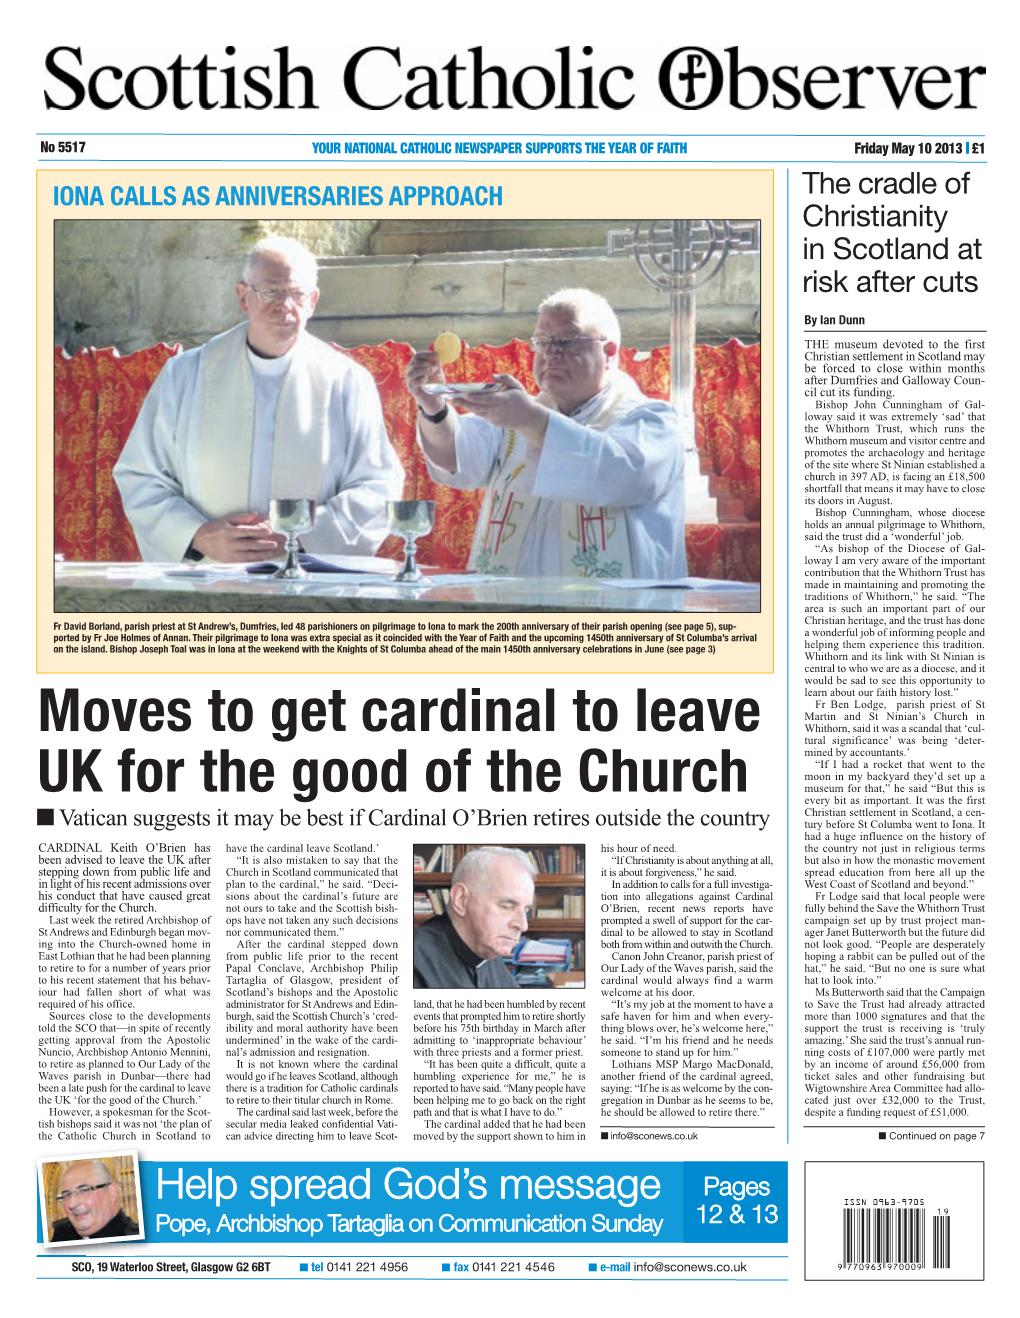 Moves to Get Cardinal to Leave UK for the Good of the Church